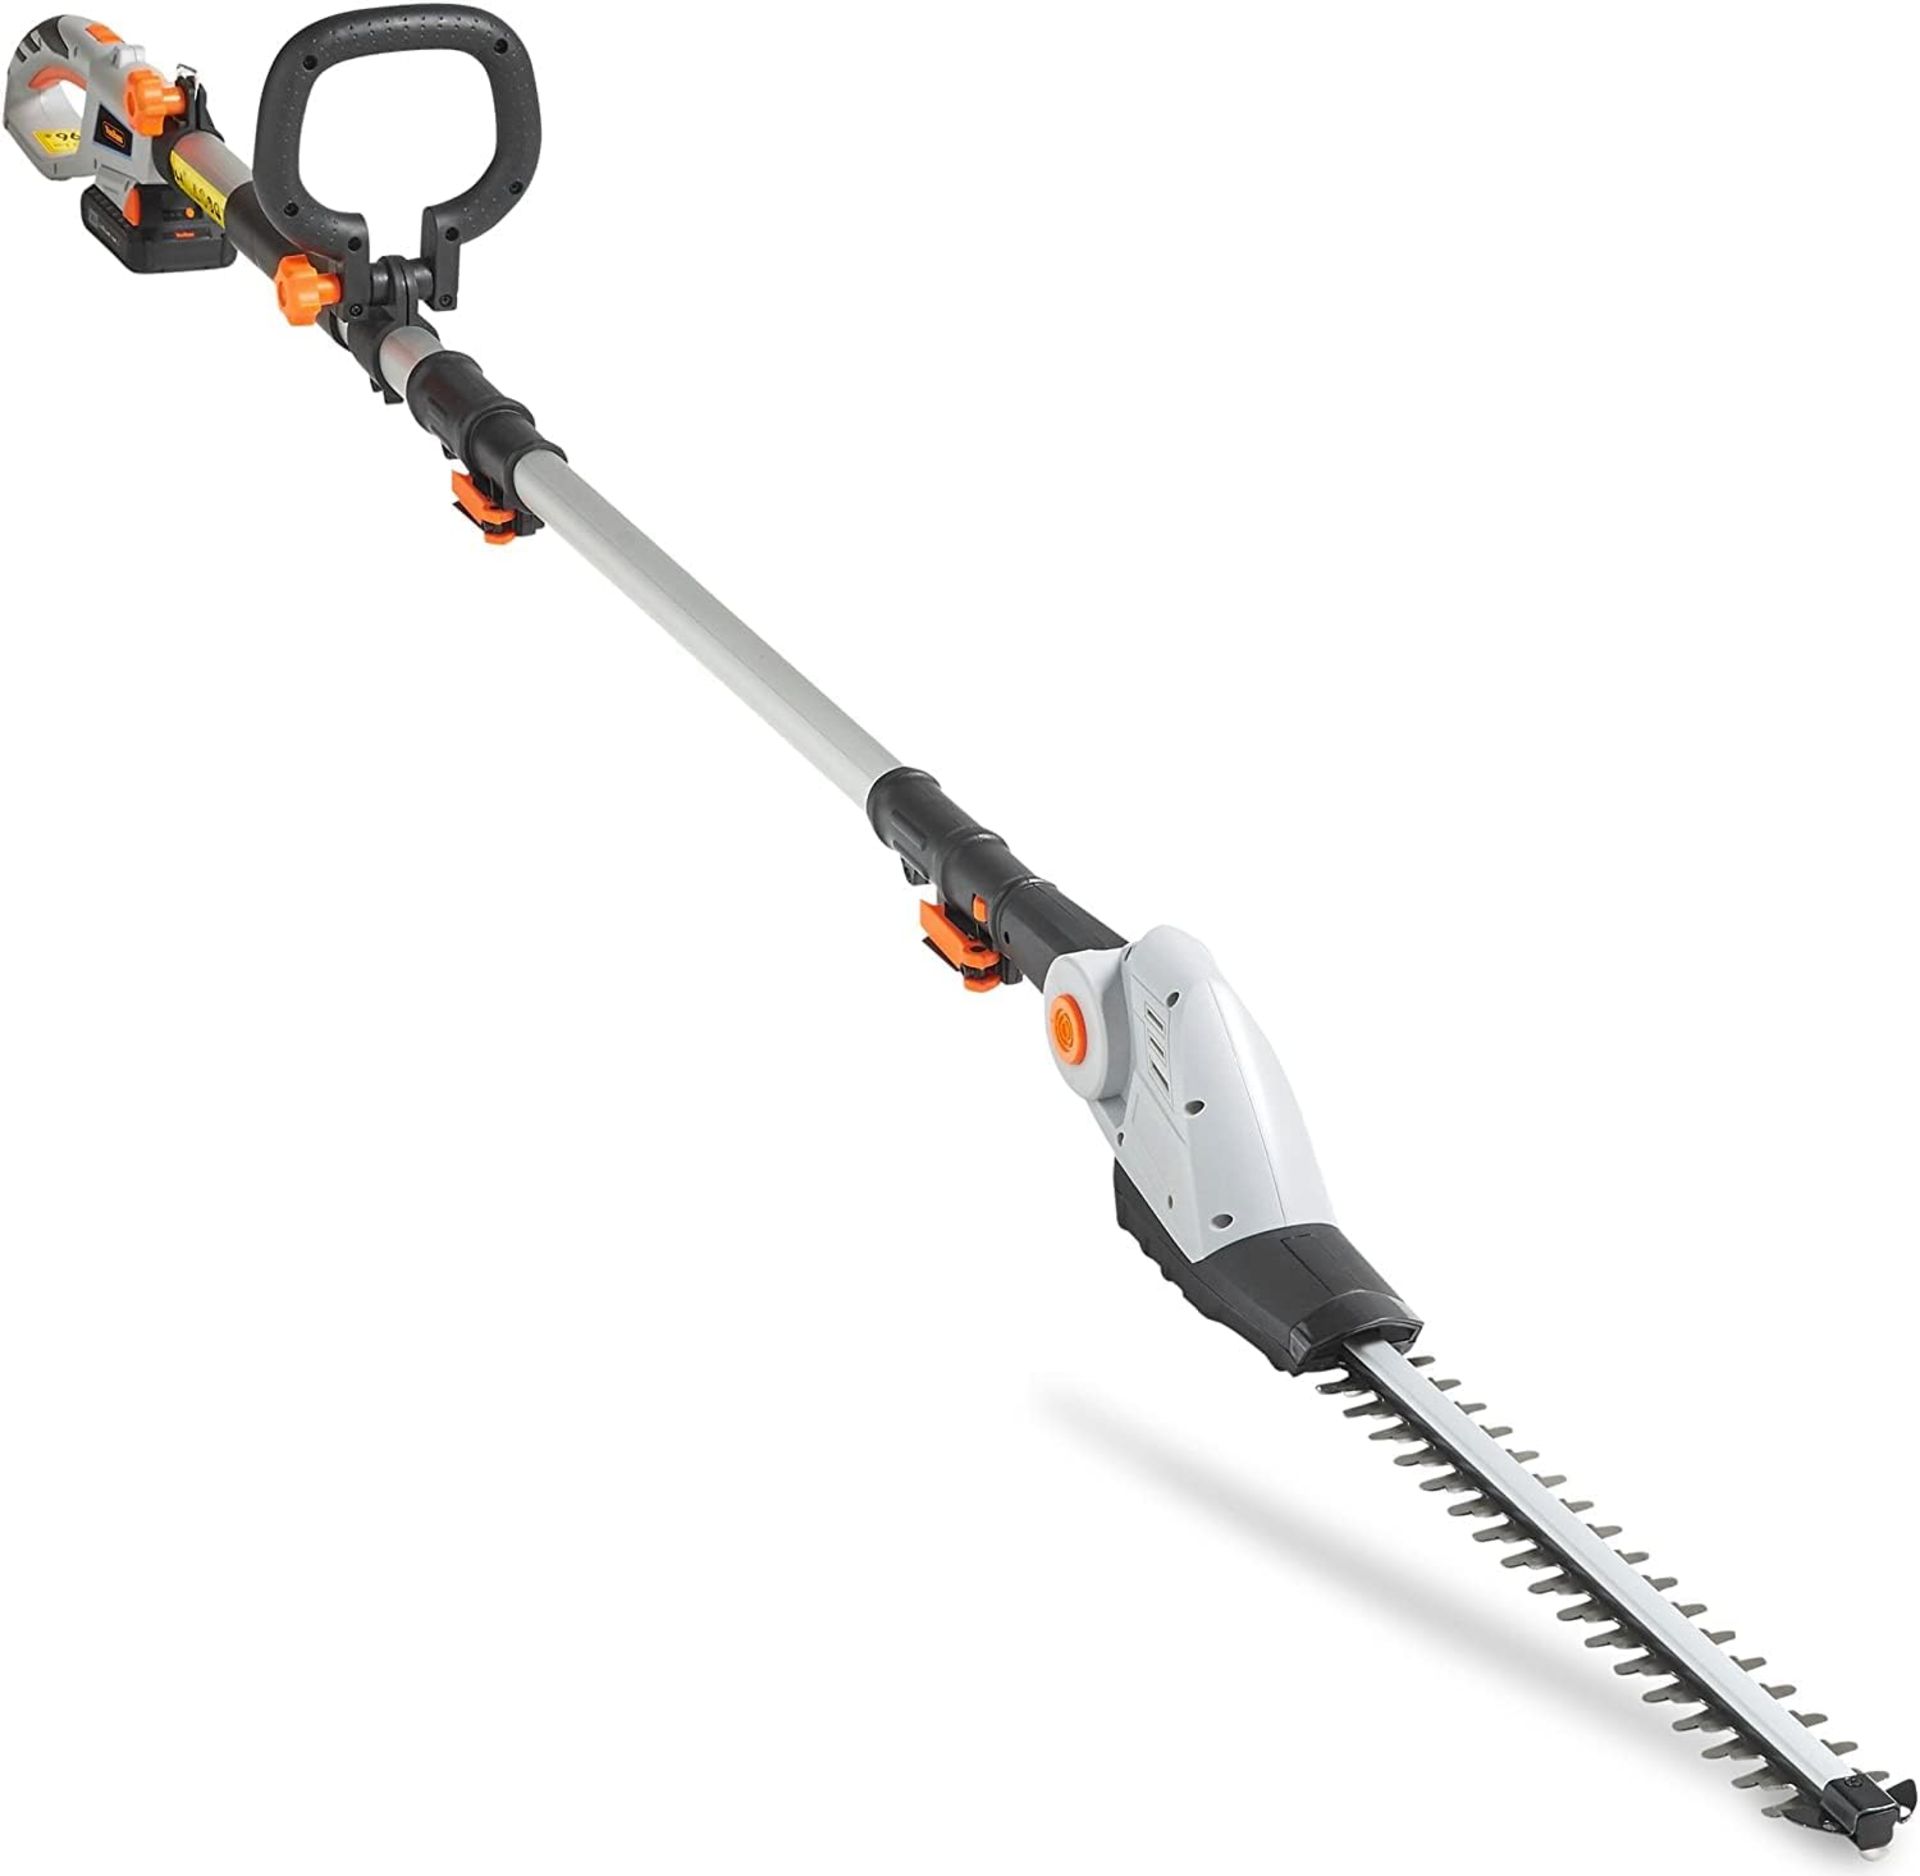 BRAND NEW G SERIES CORDLESS POLE TRIMMER R3-3